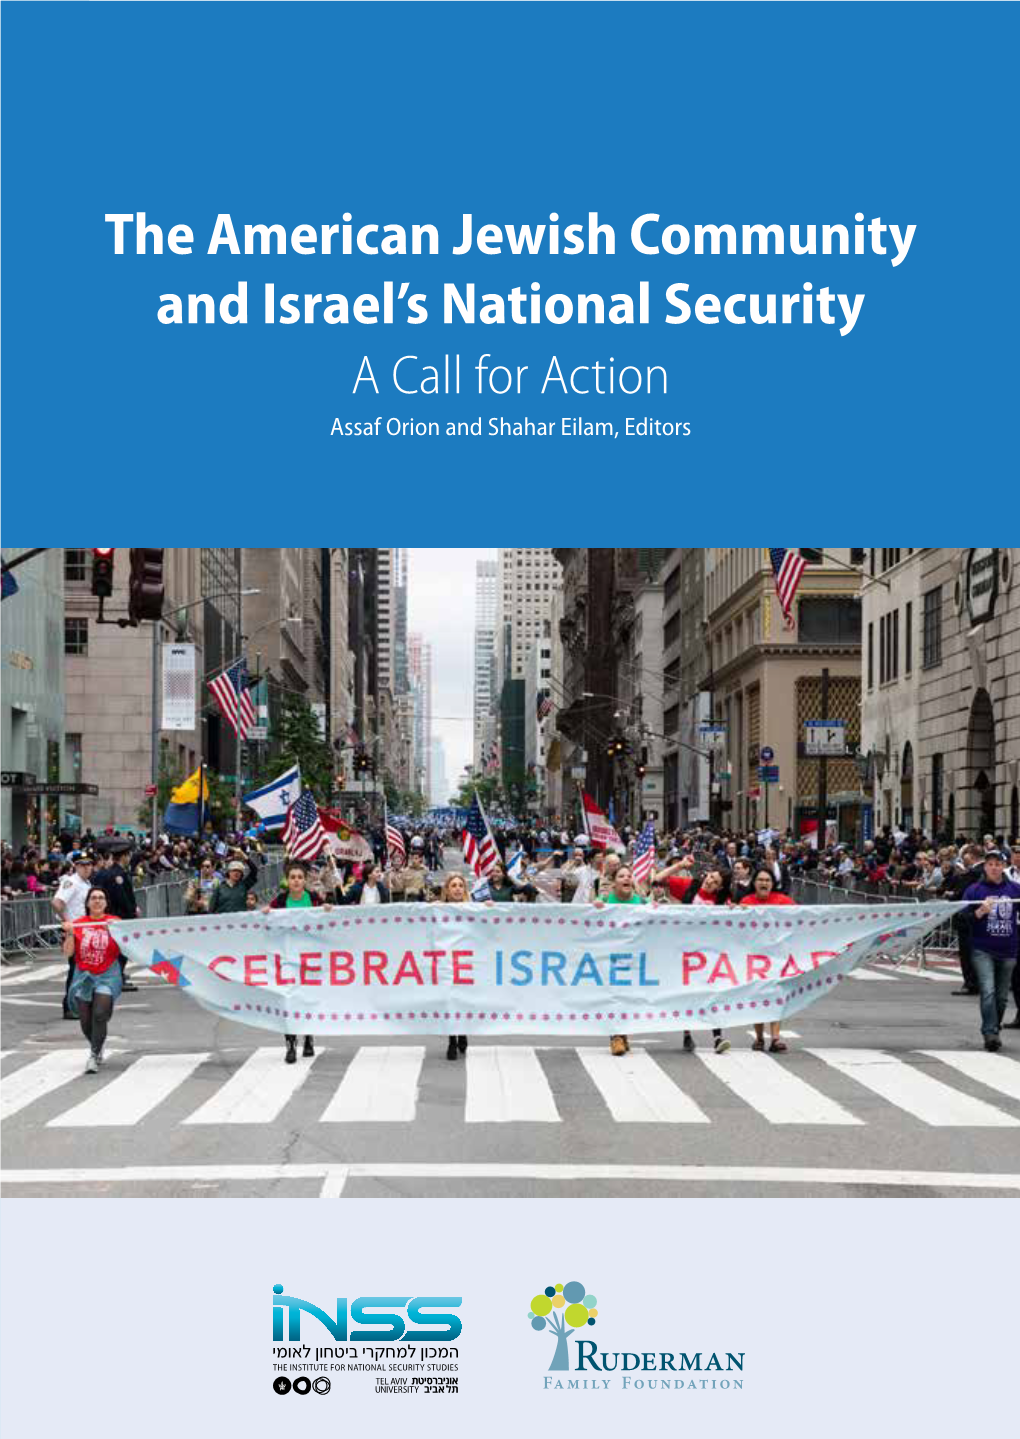 The American Jewish Community and Israel's National Security: a Call for Action